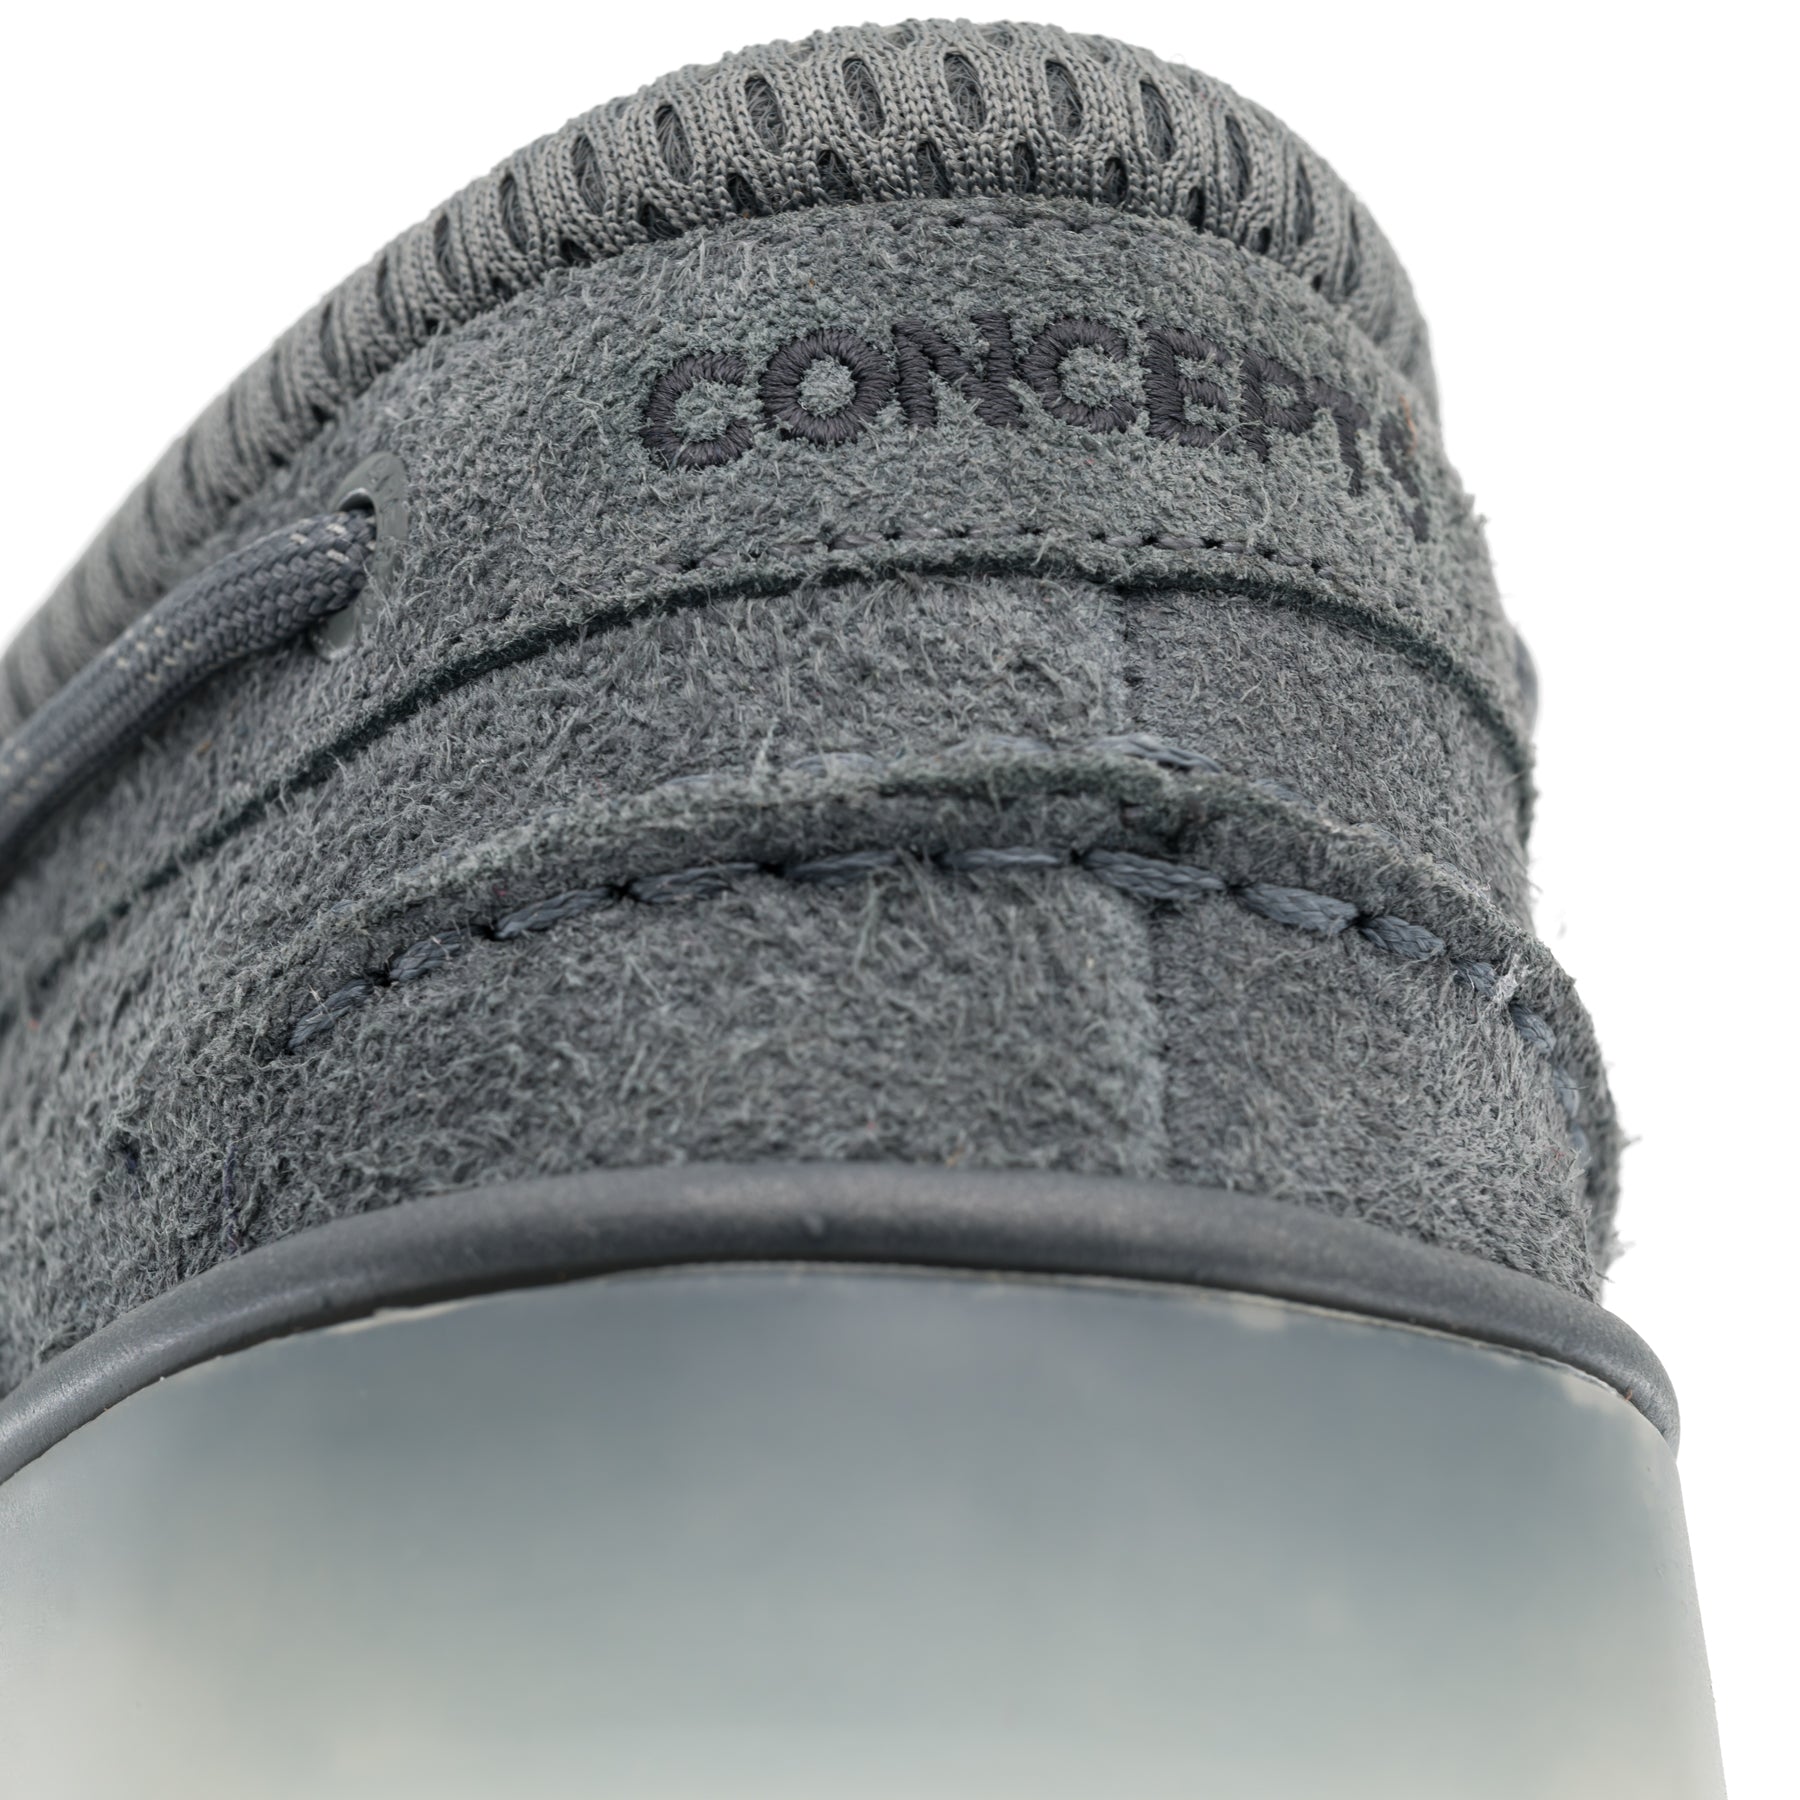 Concepts x Sperry Authentic Original 3-Eye Cup (Grey)